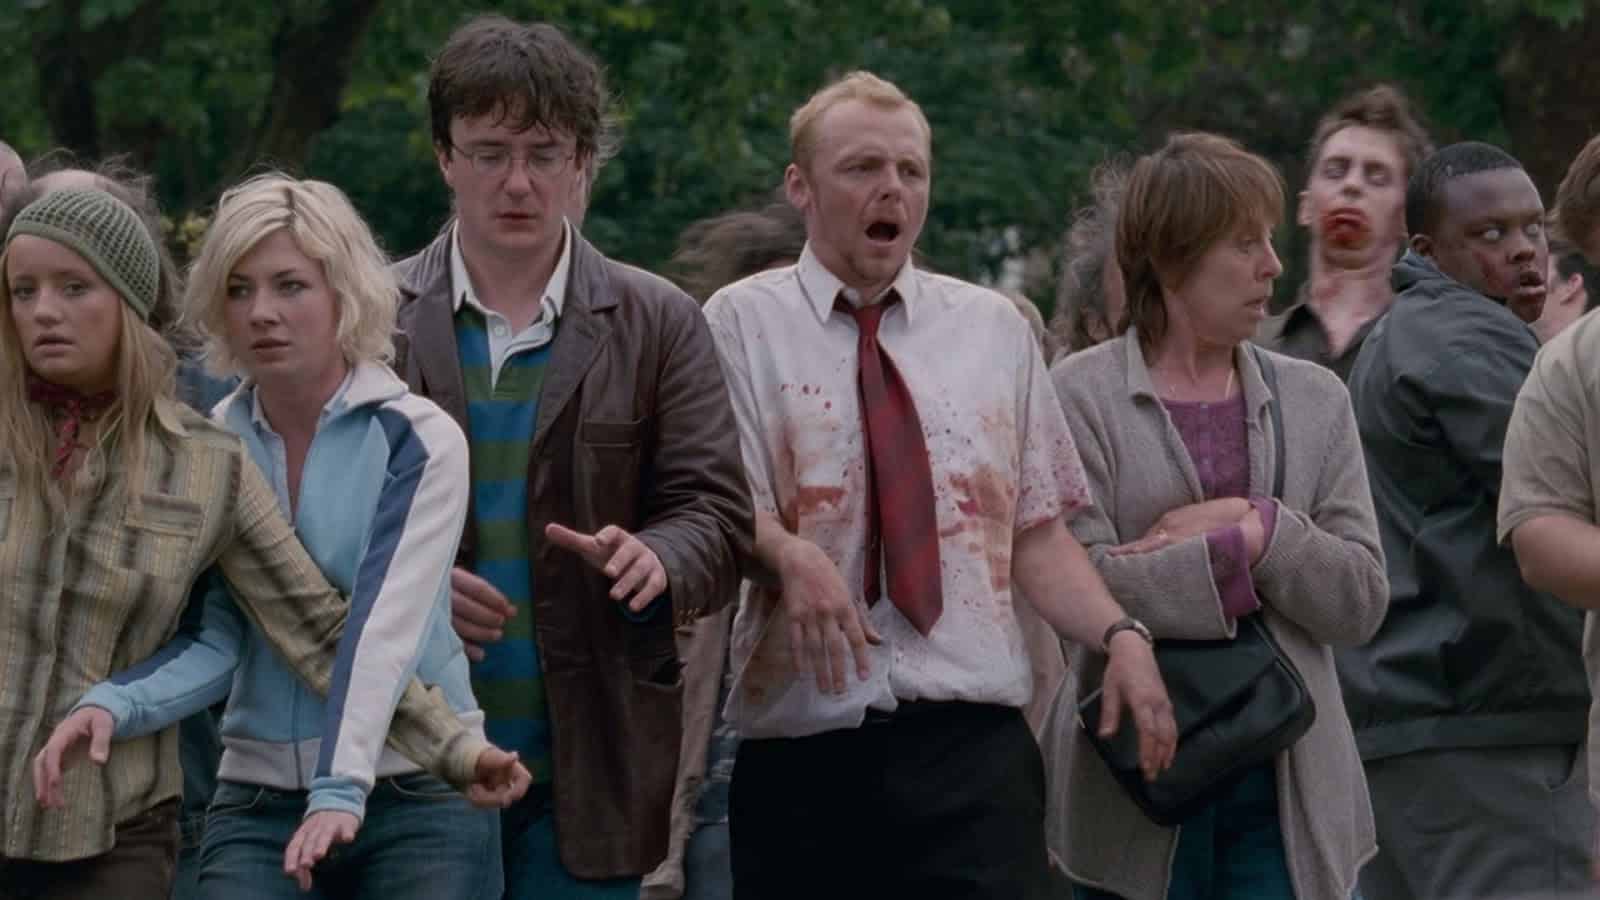 Make like a zombie in Shaun of the Dead (2004)